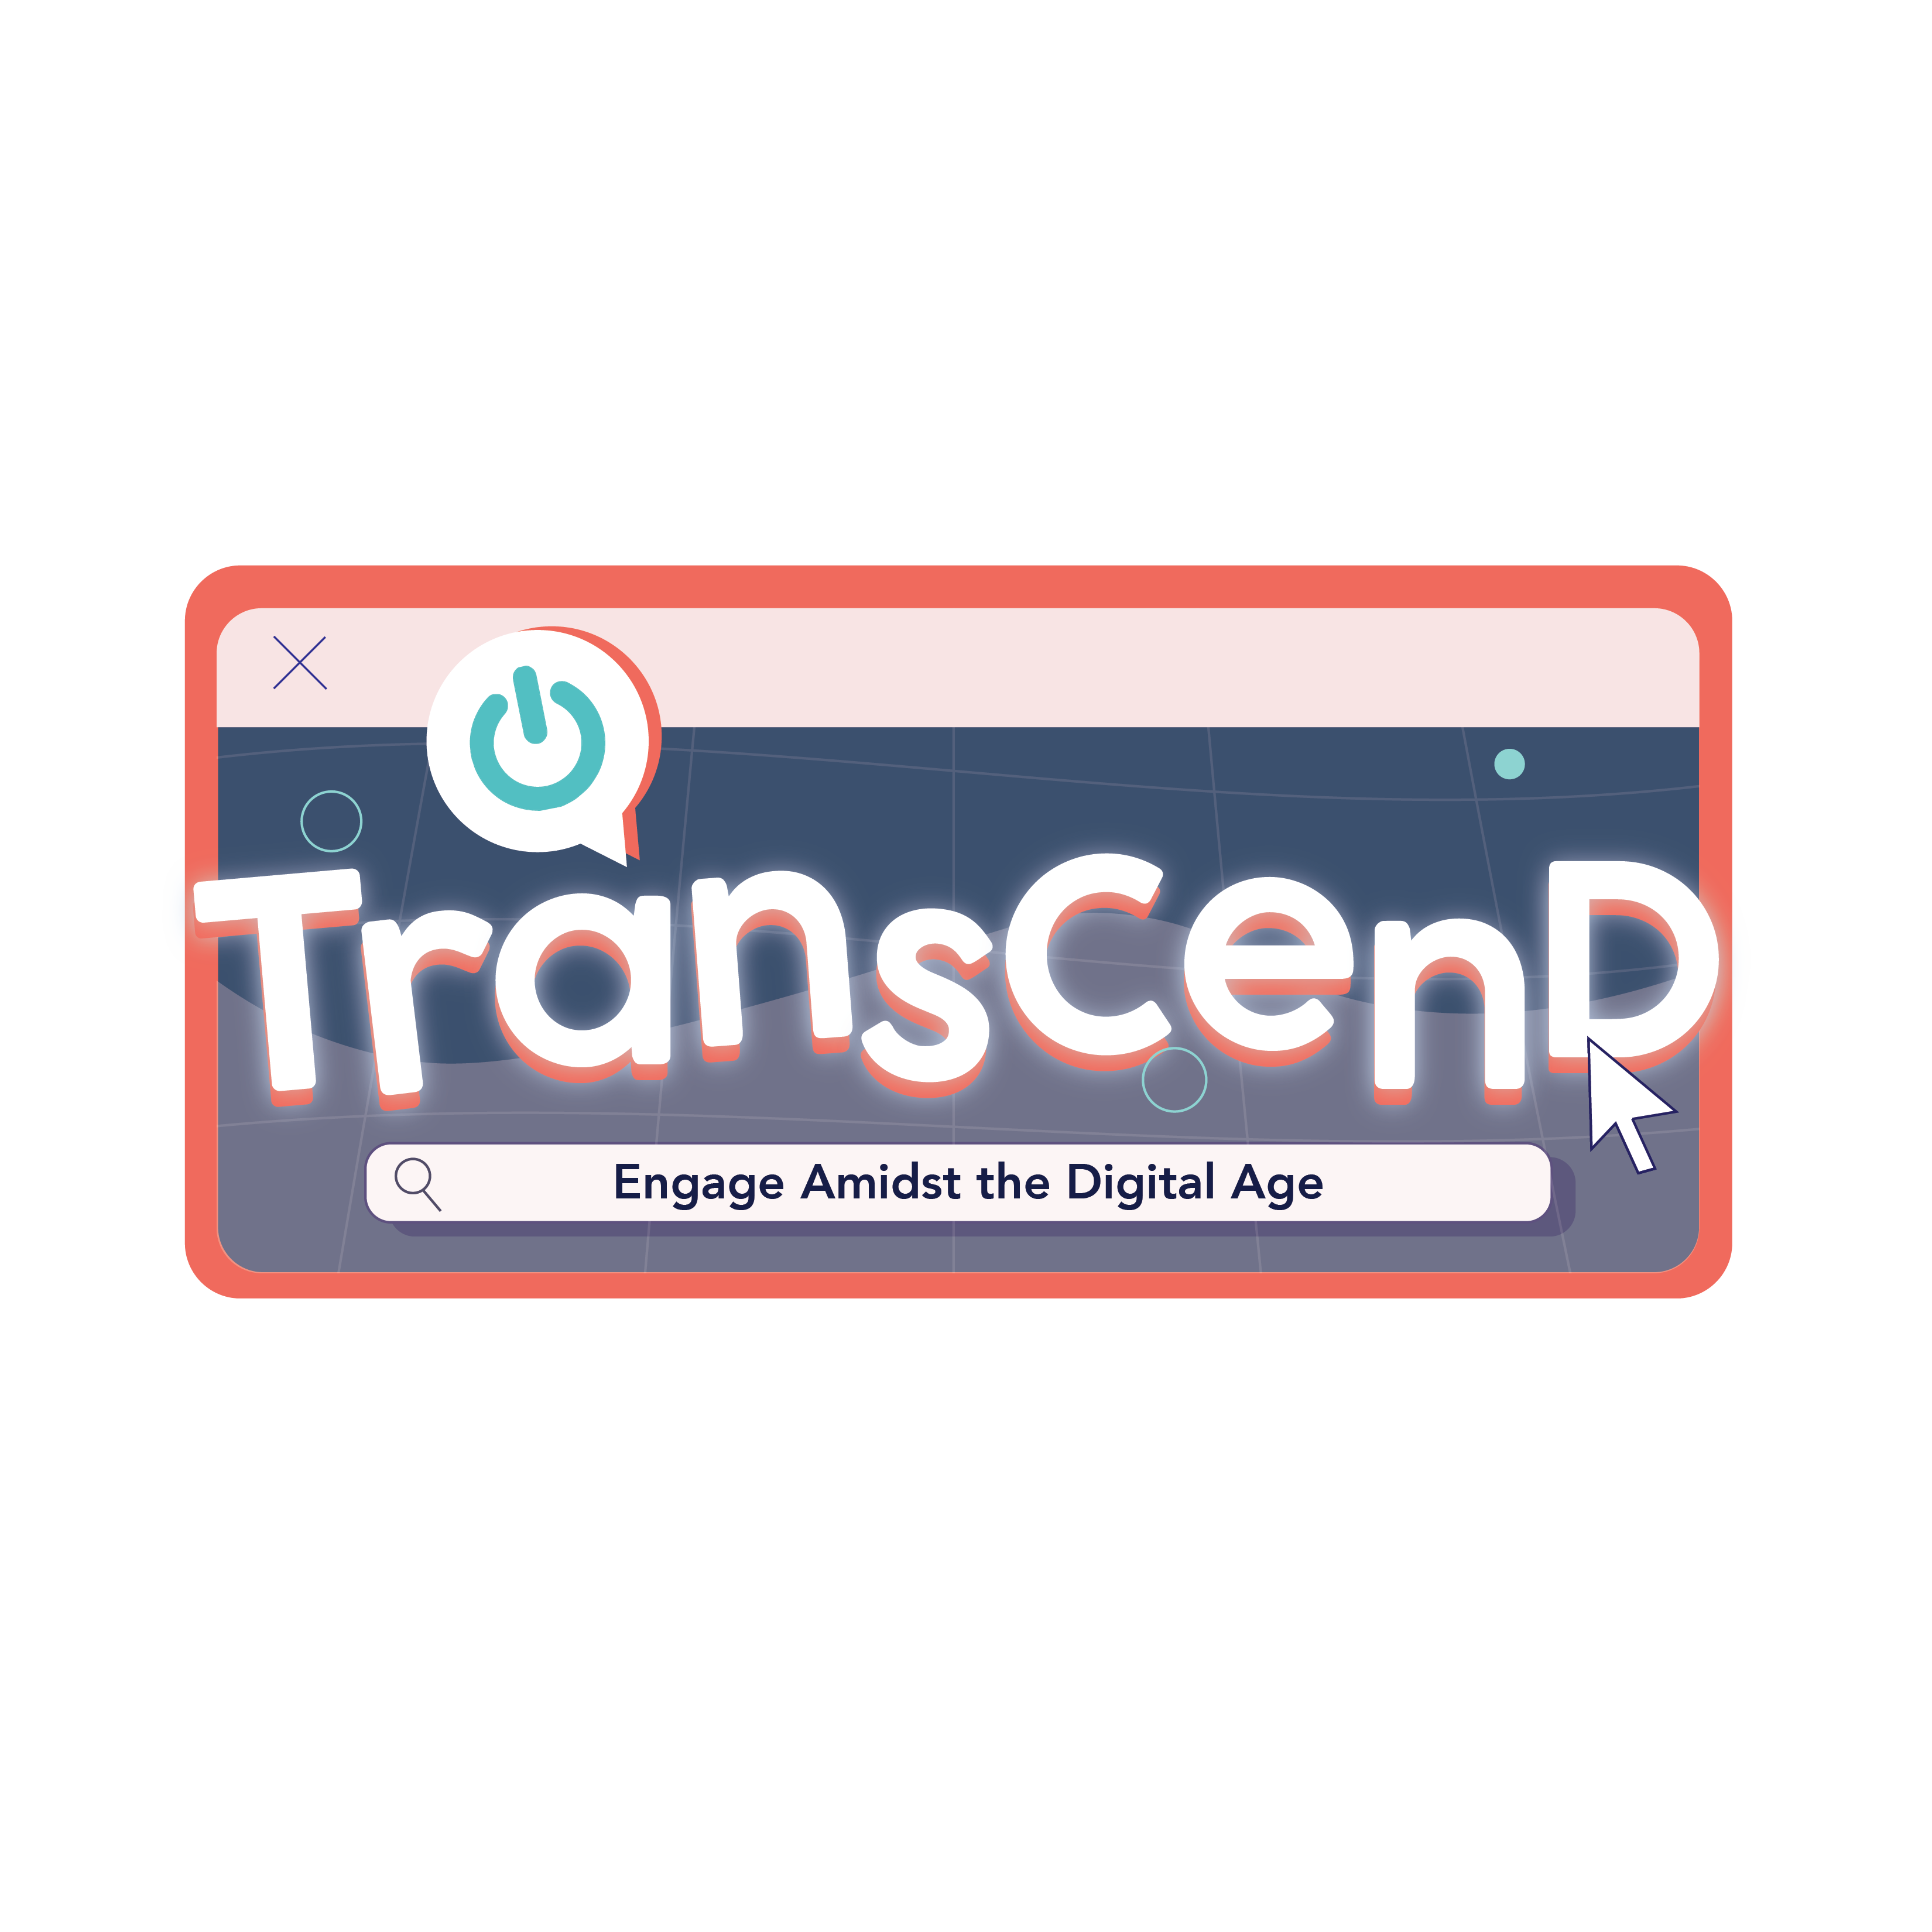 Transcend: Engage Amidst the Digital Age